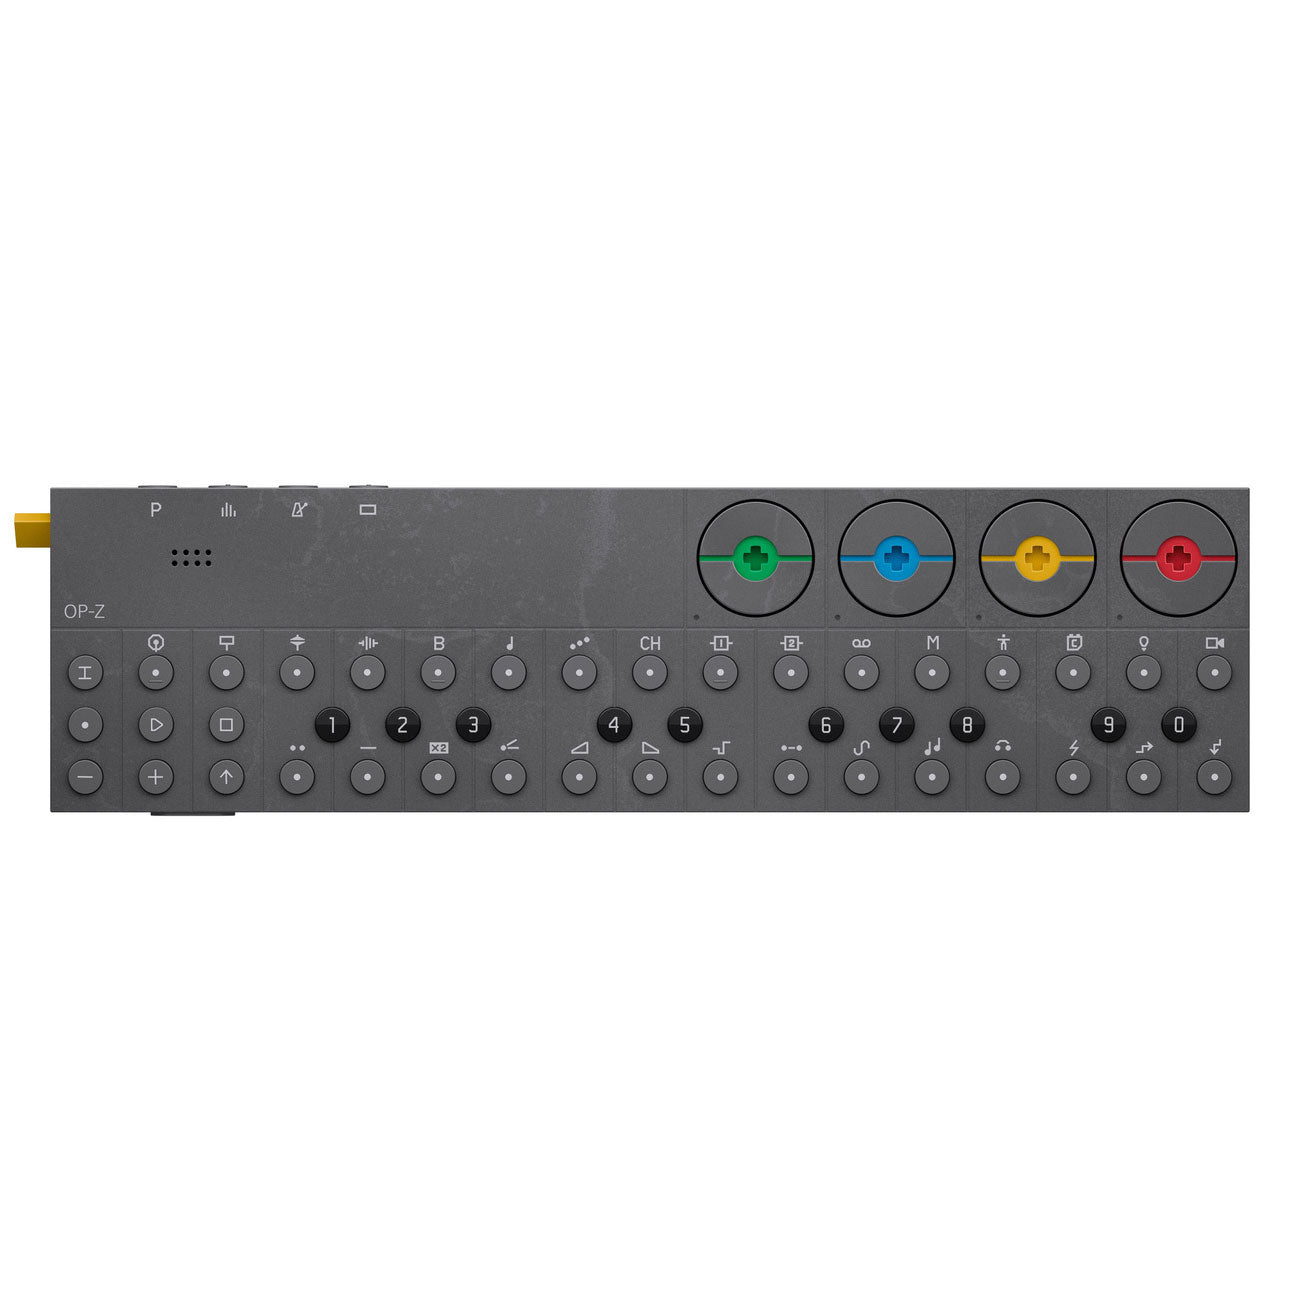 OP-Z Multimedia Synthesizer and Sequencer | Fotografiska NY Shop 